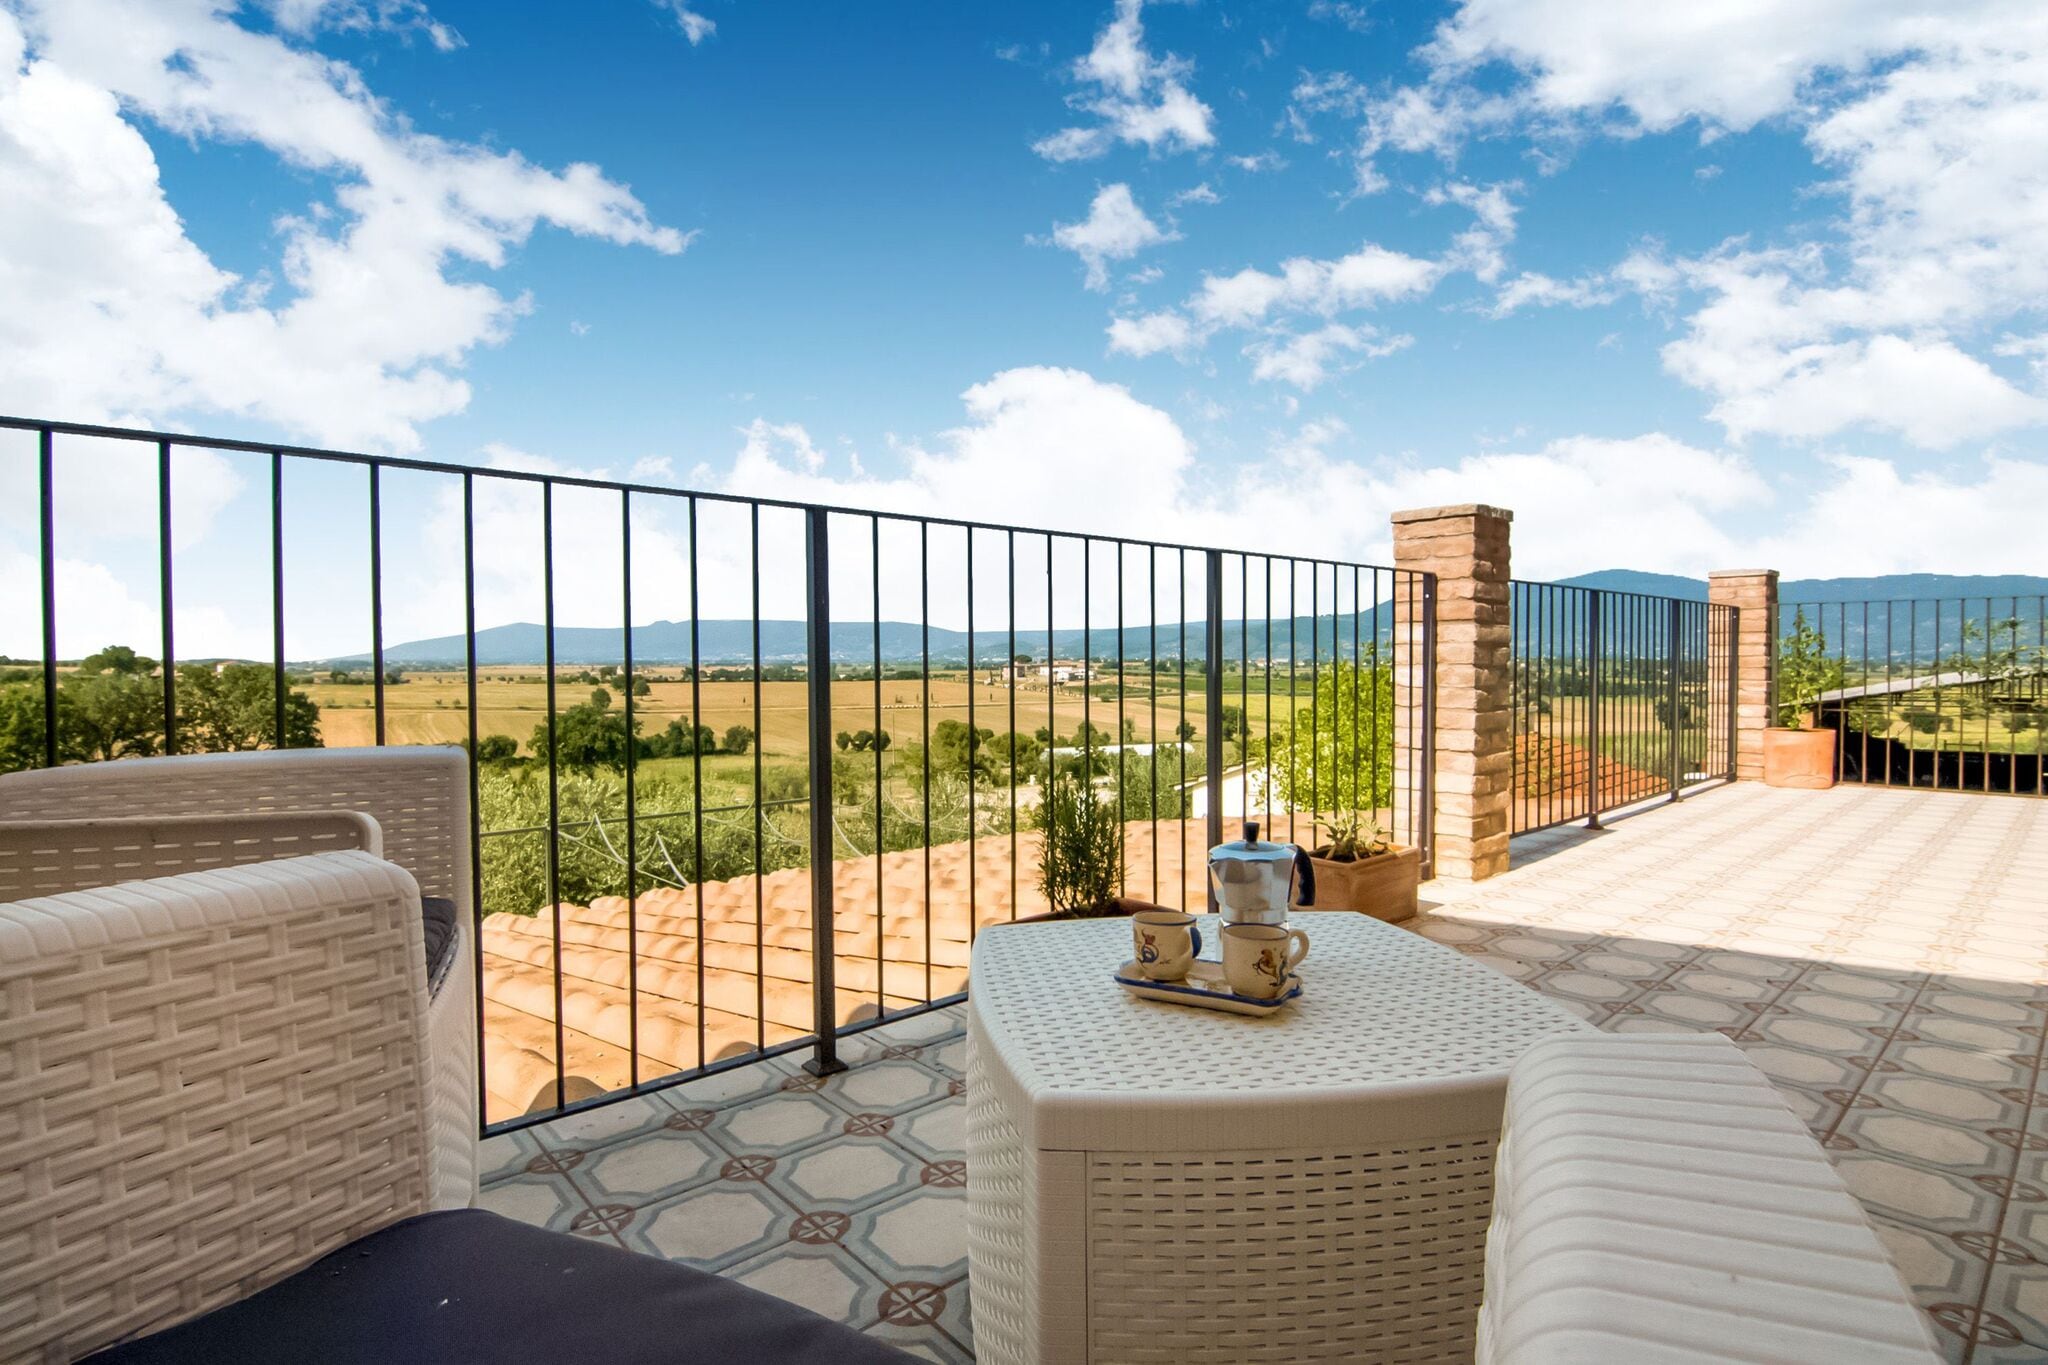 Nice apartment in Cortona with view and private terrace